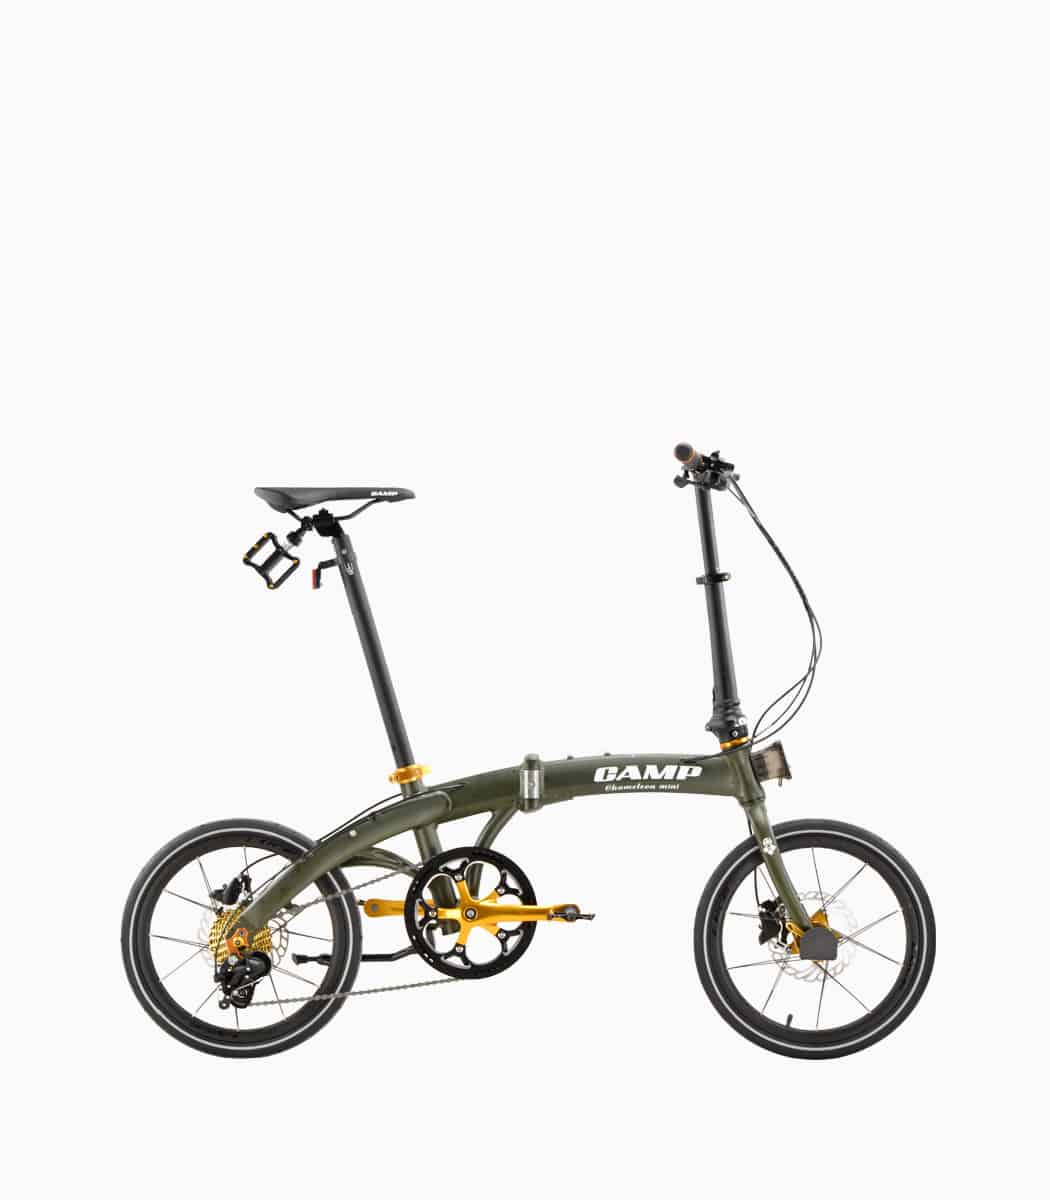 CAMP CHAMELEON Mini (MATT GREY) foldable bicycle with reflective tyres right